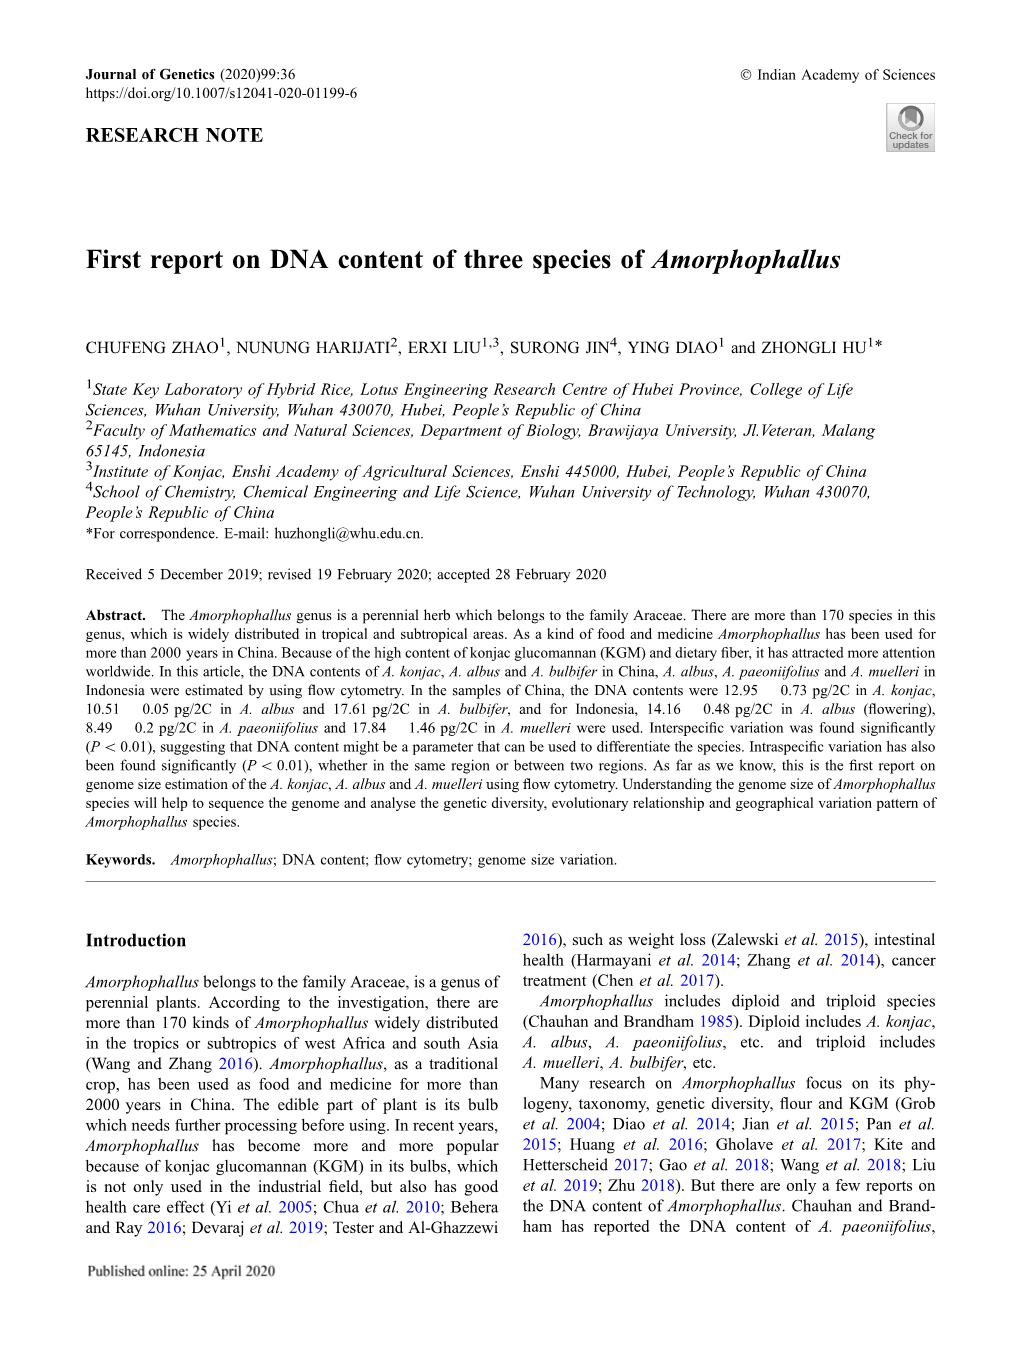 First Report on DNA Content of Three Species of Amorphophallus